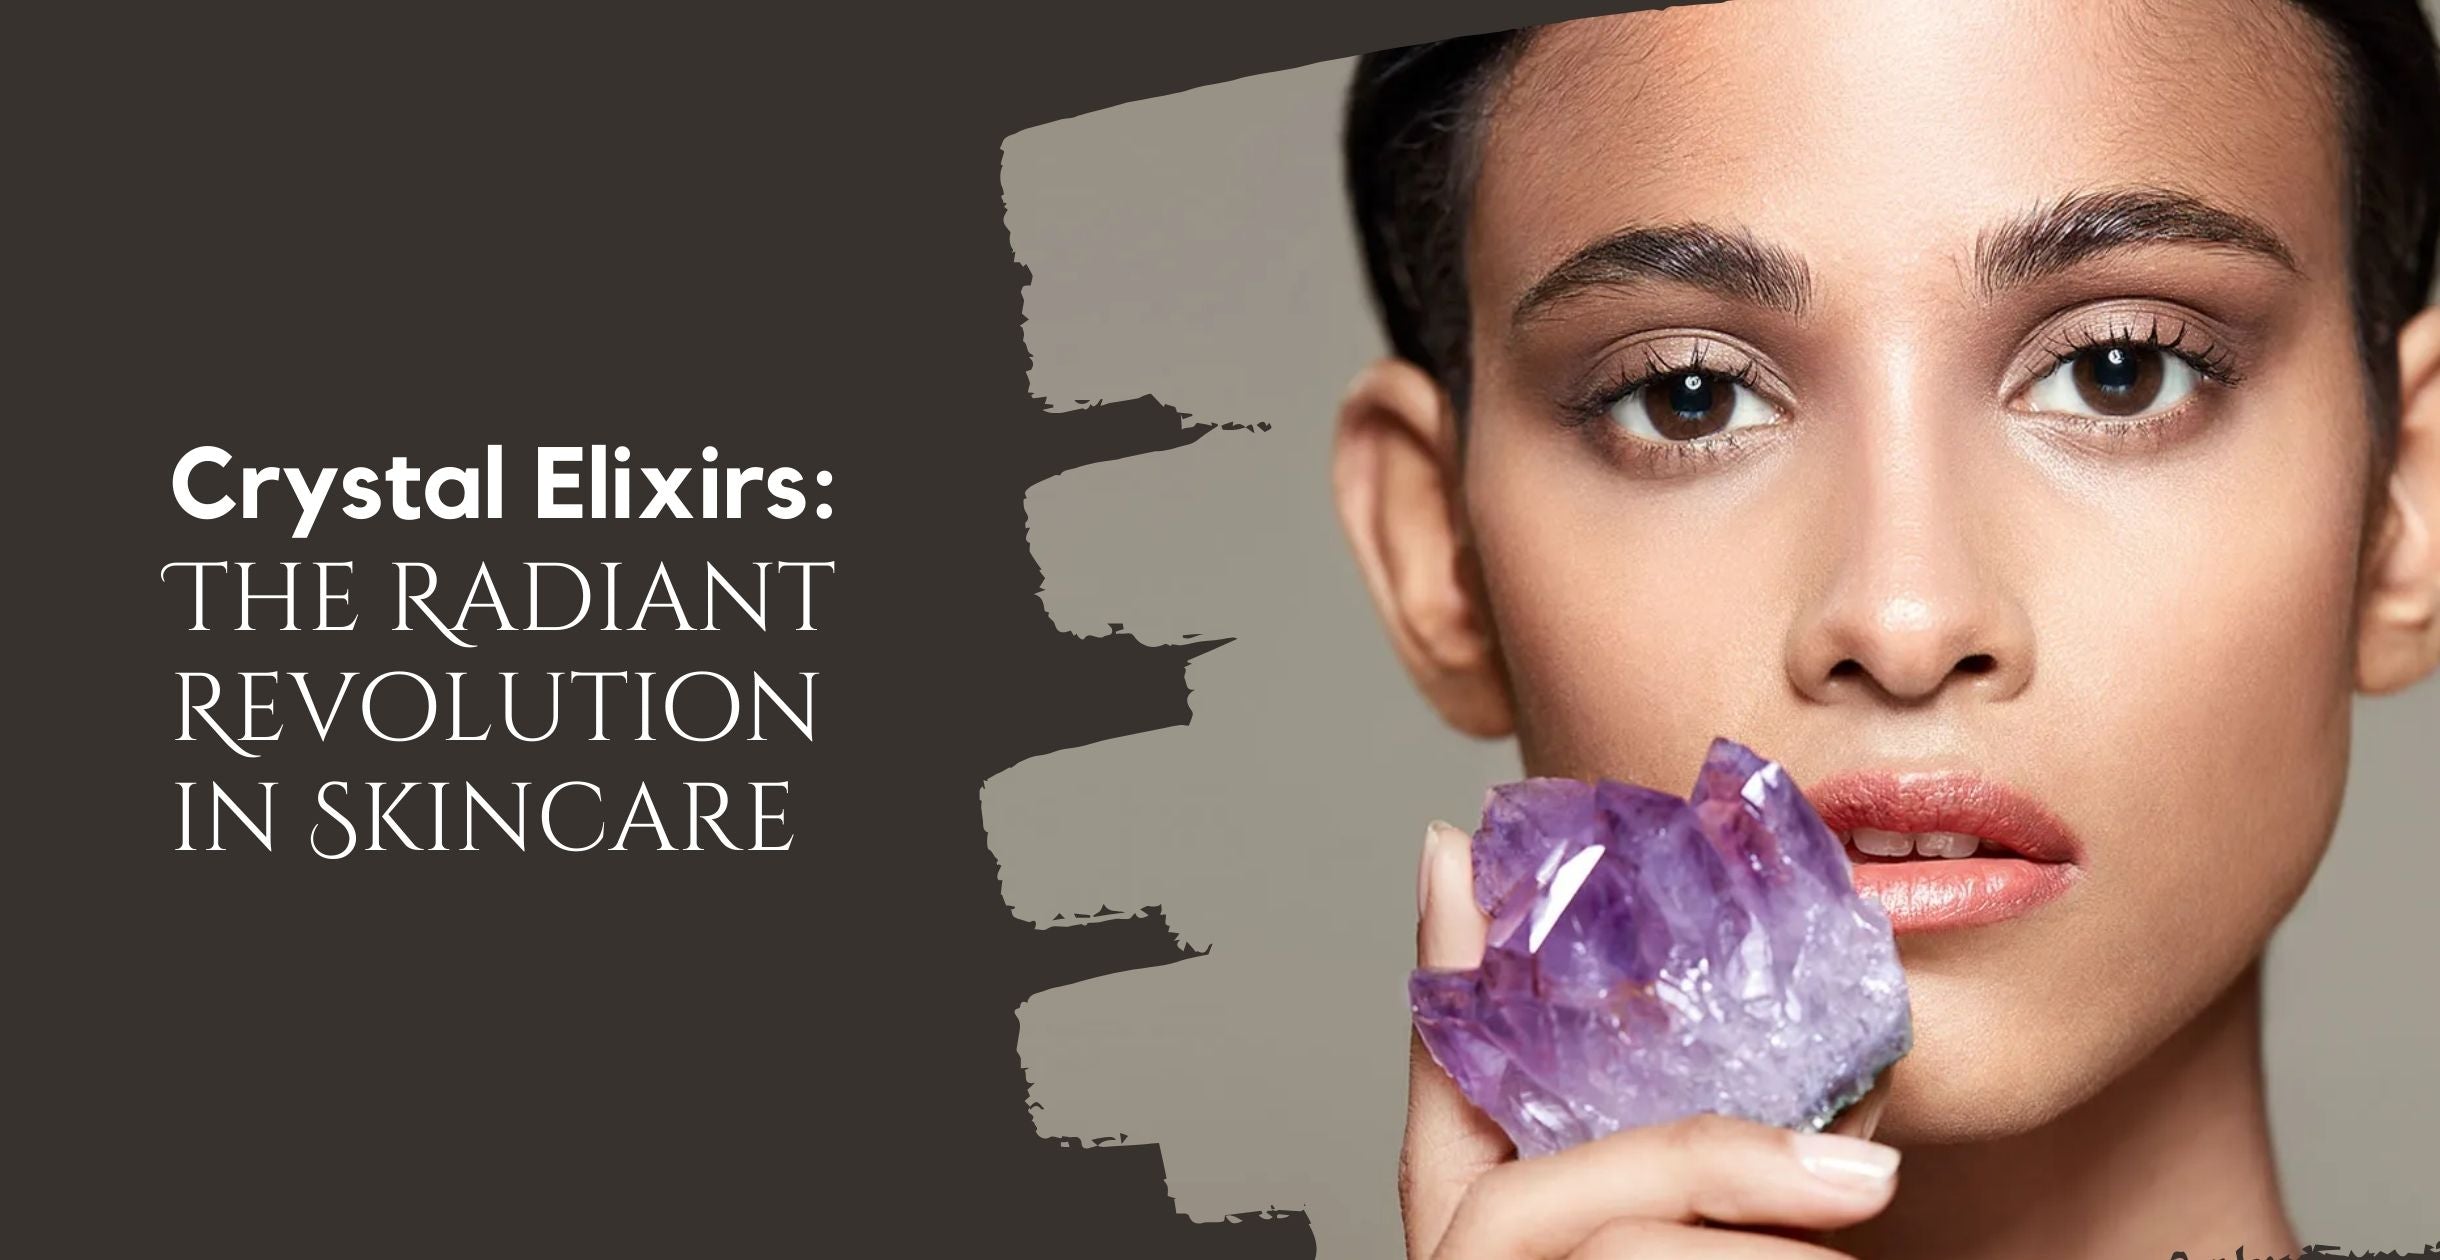 Crystal Elixirs: The Radiant Revolution in Skincare